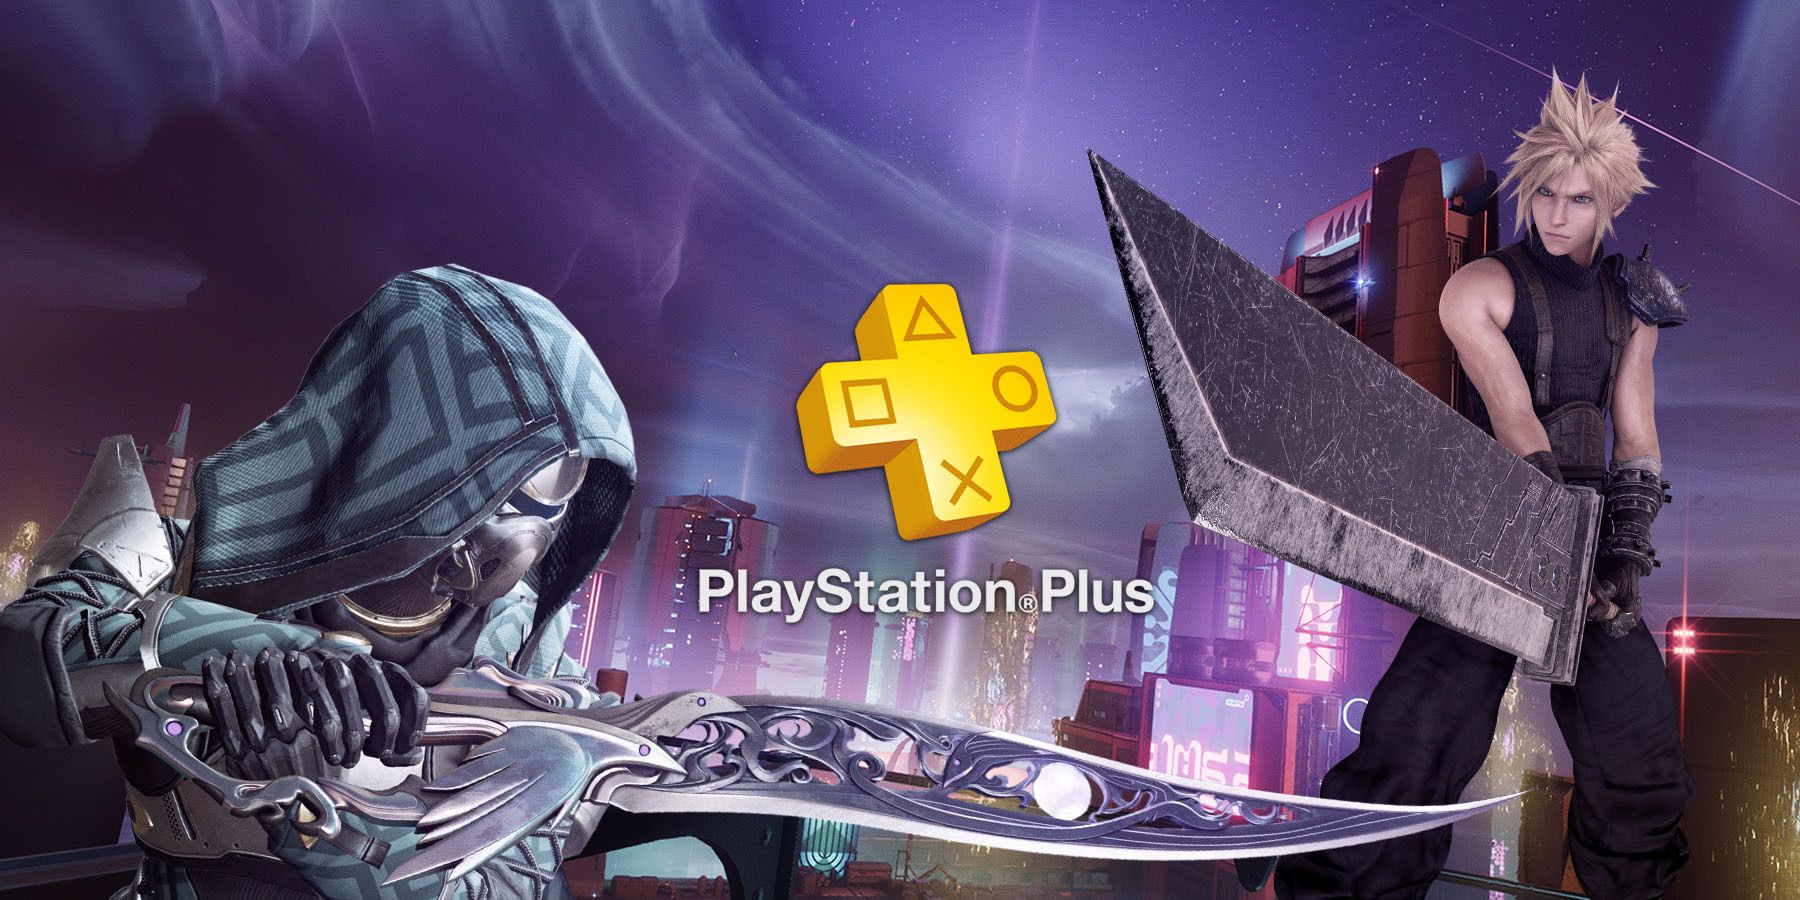 PS Plus Free Games for February 2023 Might Be Going After
March's Crown